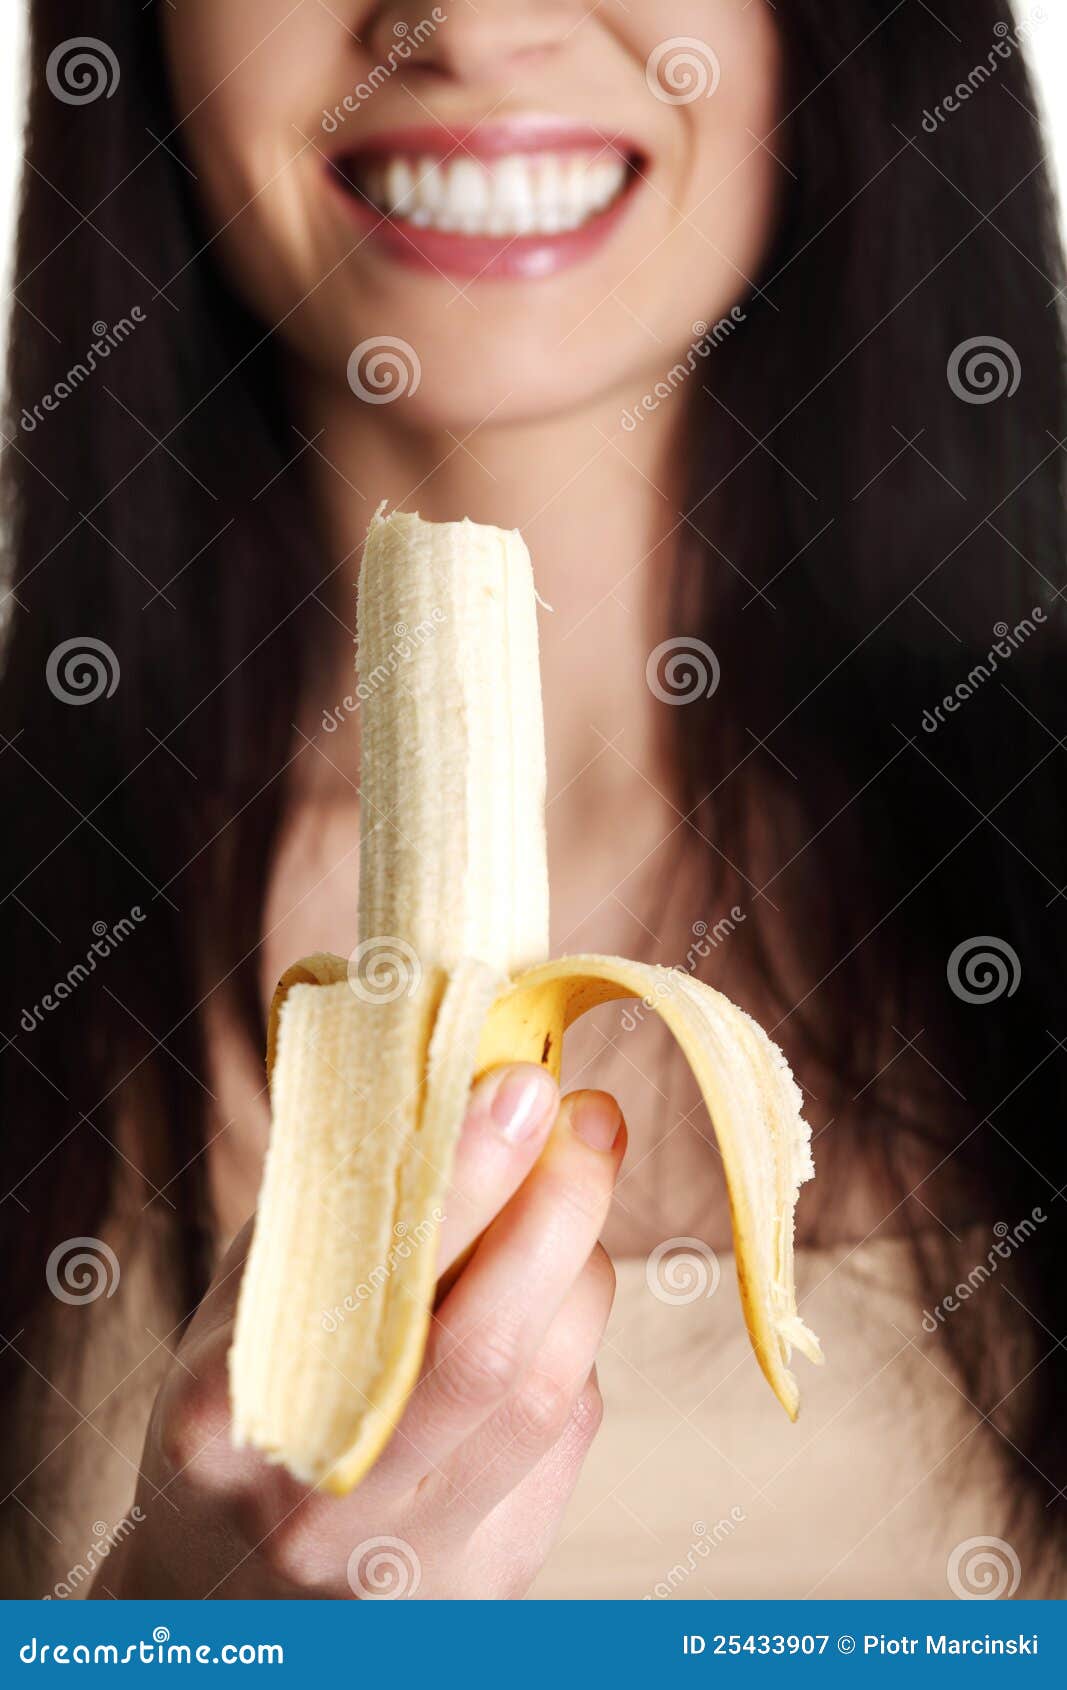 adrienne gould recommends woman eating banana picture pic